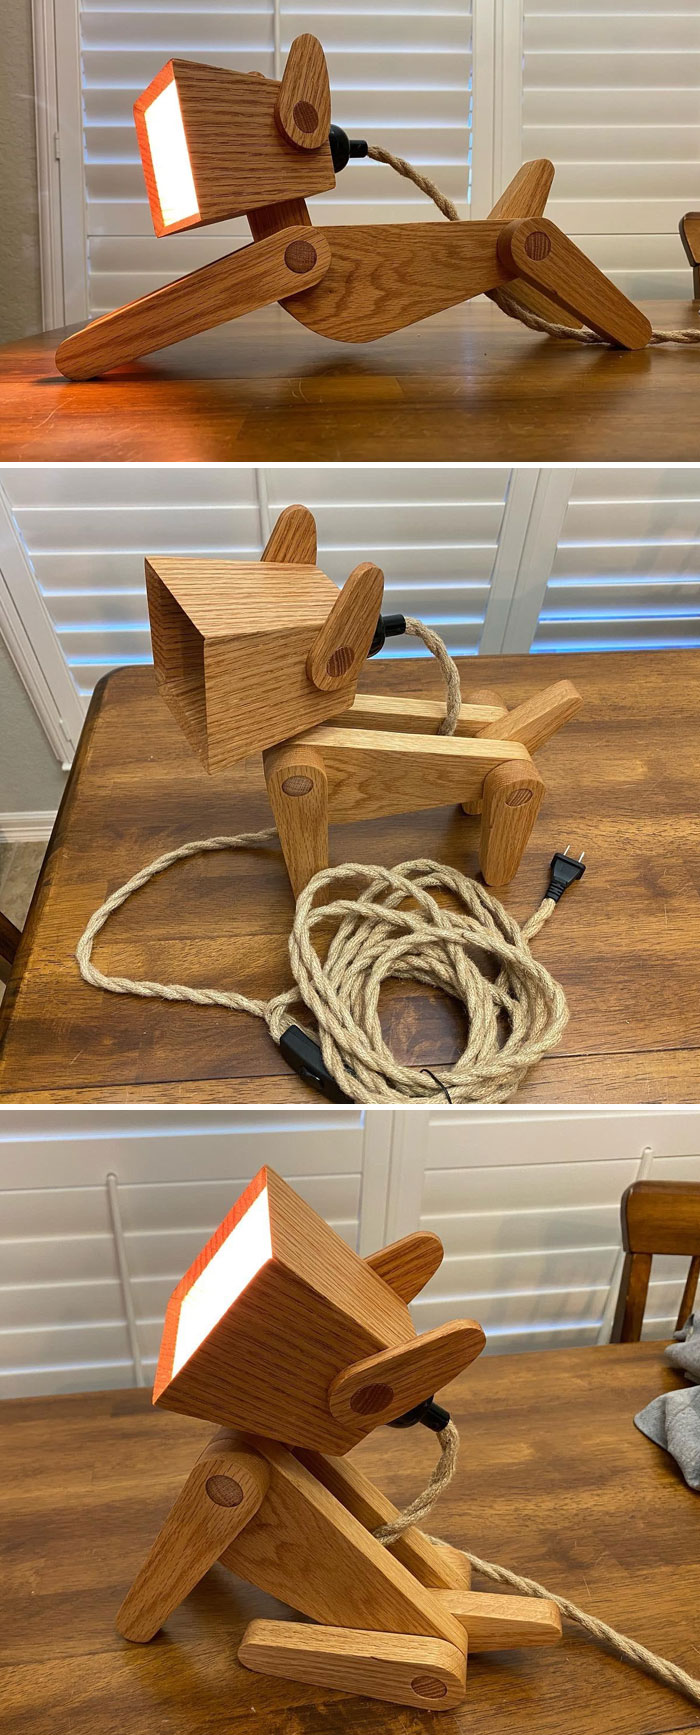 The Woodworking Online Group Is All About Appreciating Diy Projects And Here Are Their Best Works 50 New Pics Bored Panda